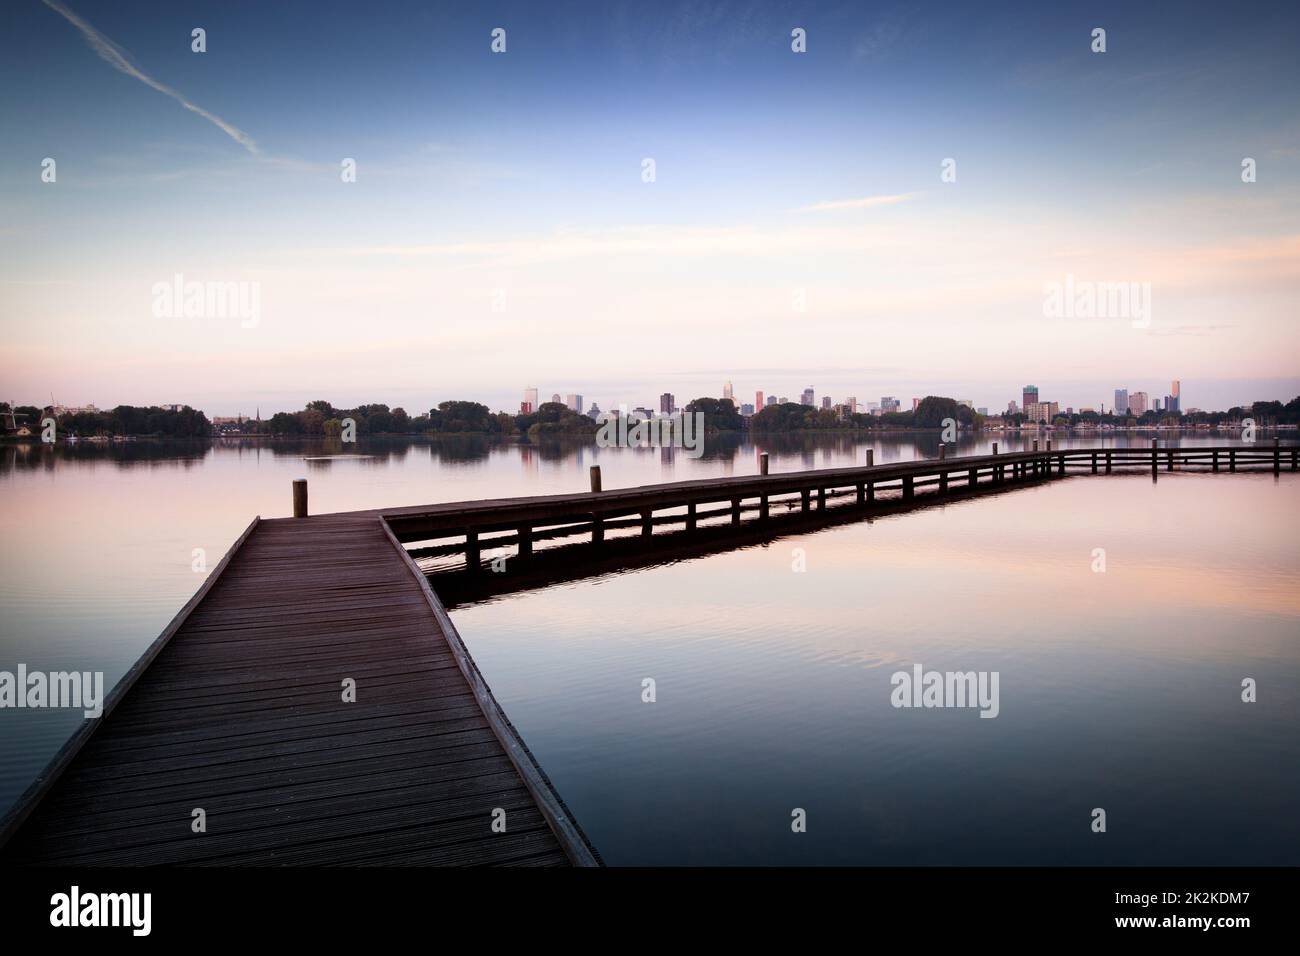 Jetty in the Kralingse Plas with the skyline of Rotterdam in the background Stock Photo